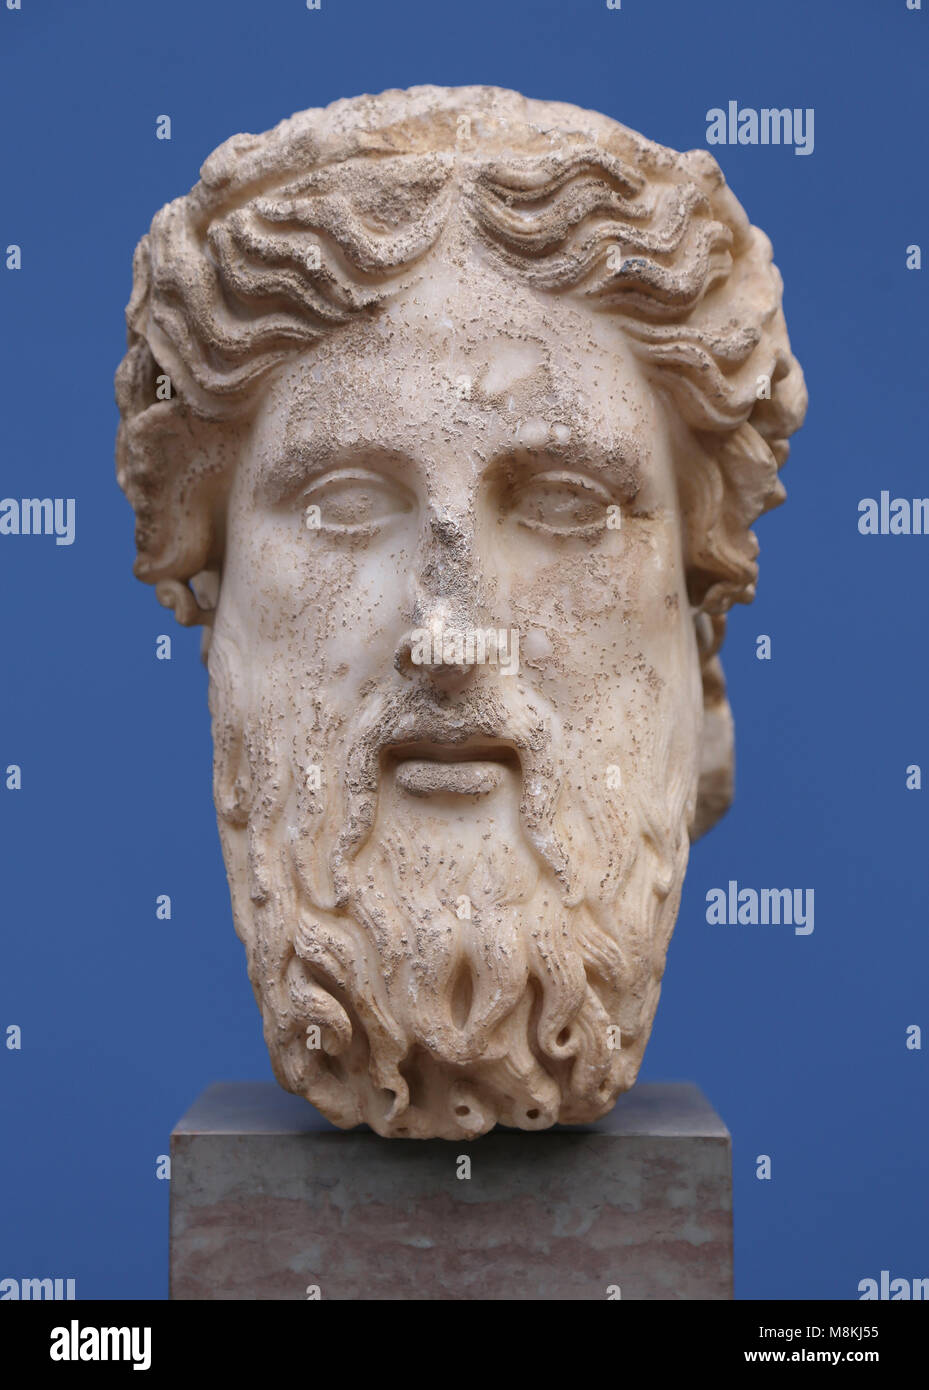 Bearded head of Hermes. Herm. Italy, 1st-3nd century AD. Marble. Greek god used as a marked boundaries or landmark. Stock Photo